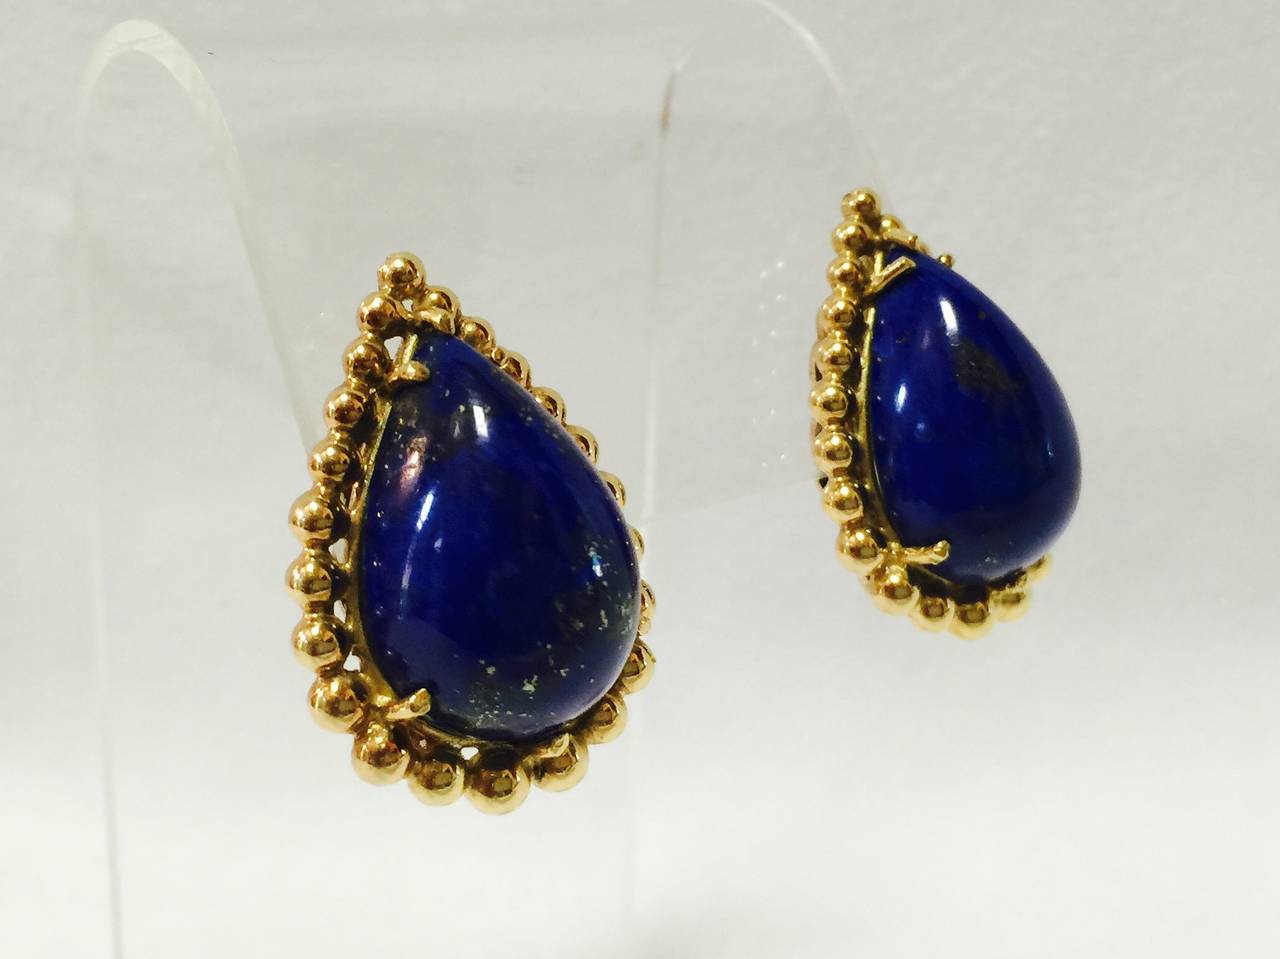 Classically beautiful earrings in 14K yellow gold will take you anywhere from day to evening!  The focal point are pear shape Lapis Lazuli stones in all their Ultramarine blue beauty.  Artfully framed in a bead border with pierced Omega backs, these